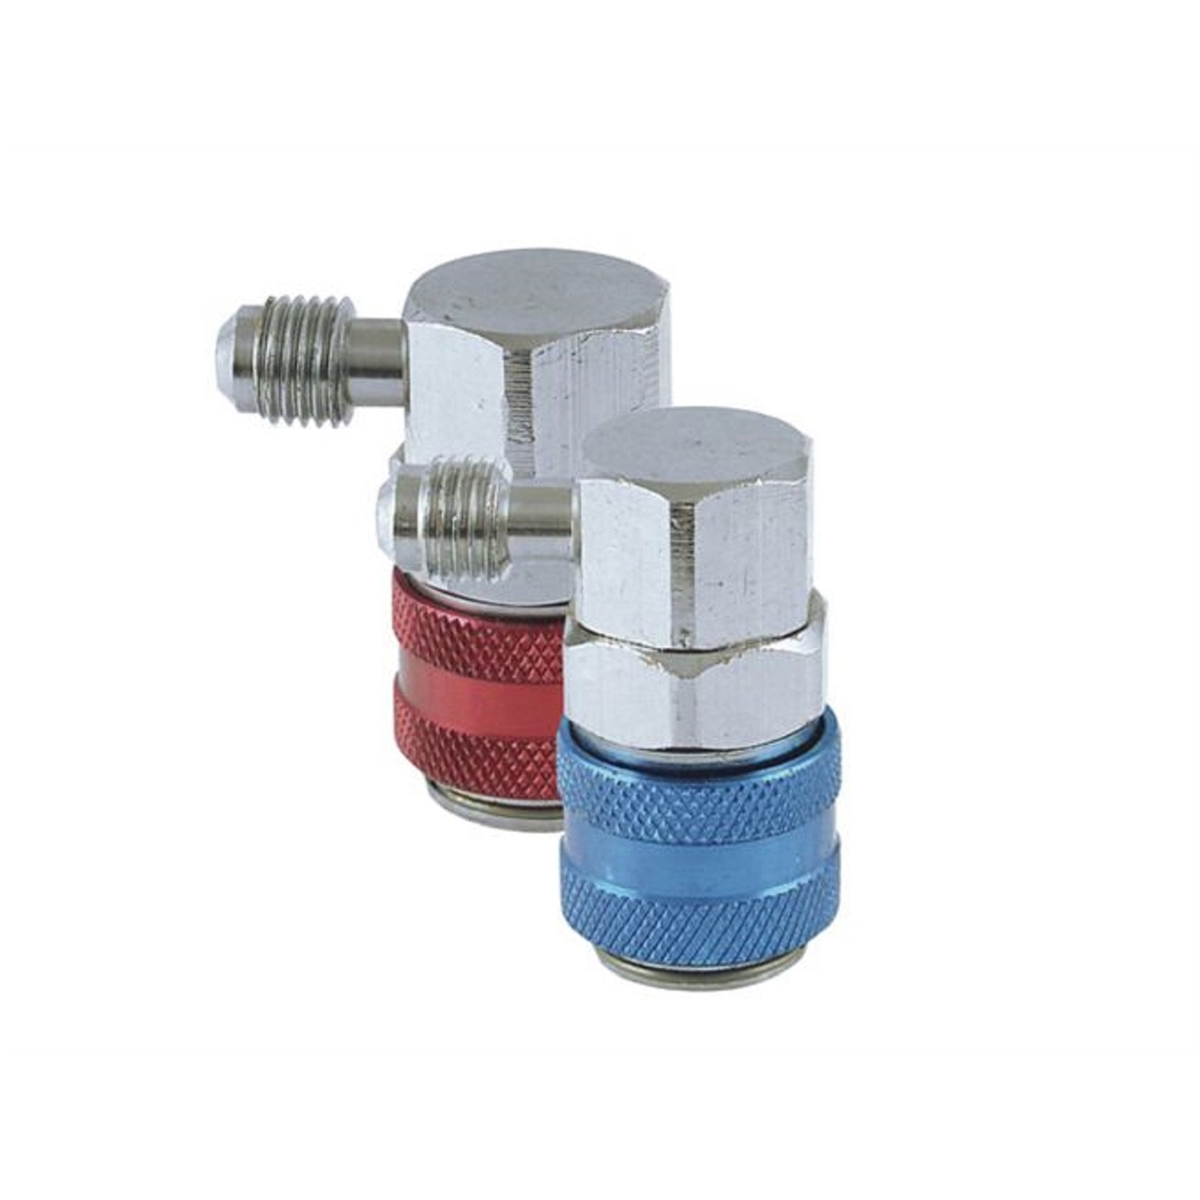 R-134a Manual Couplers 14mm